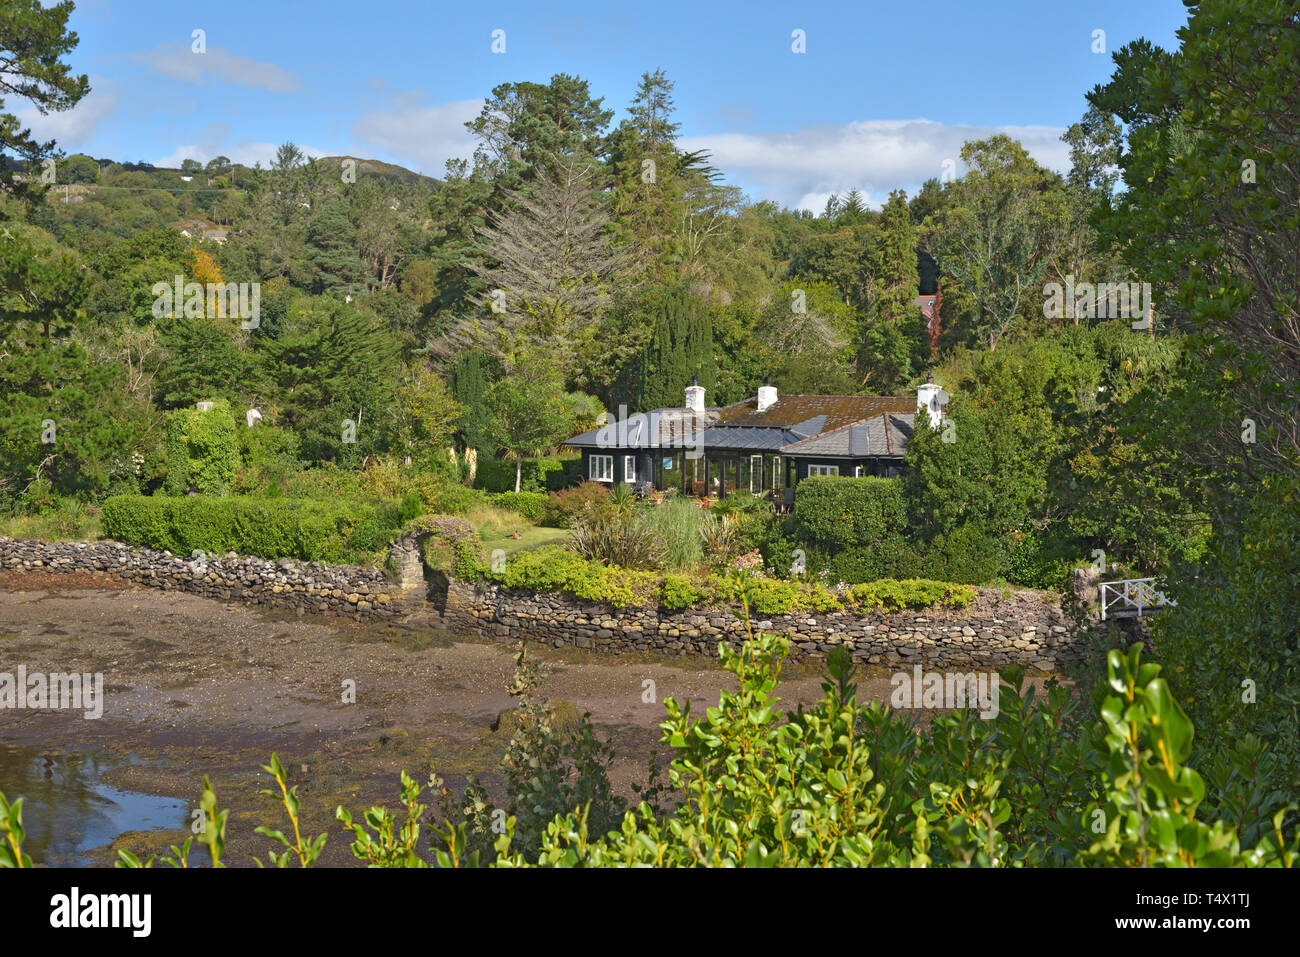 Bungalow on Shore by Bamboo Park Glengarriff Harbour Stock Photo